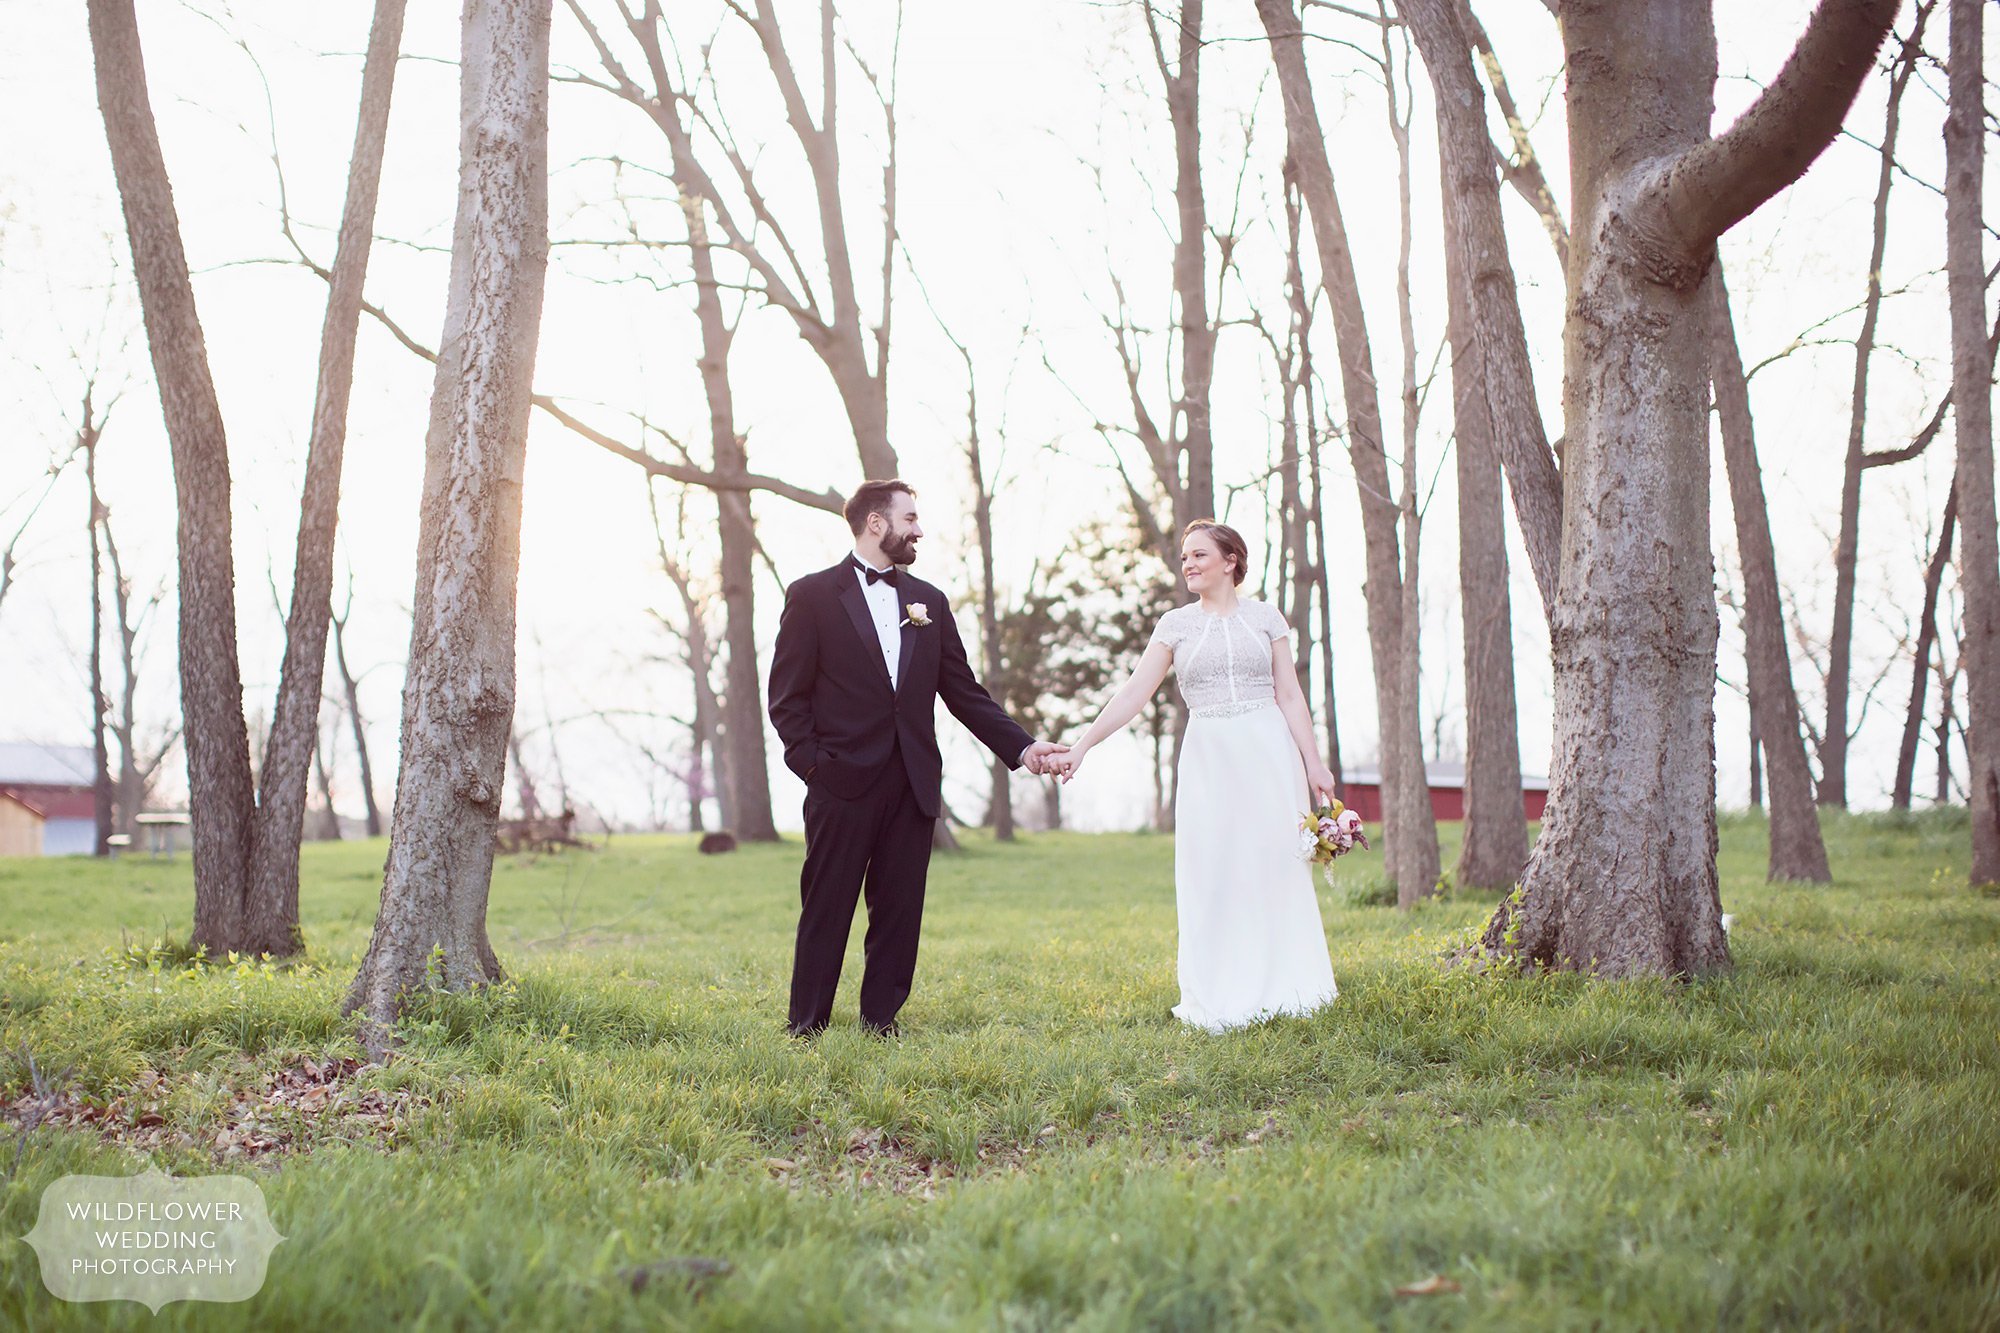 Bride and groom hold hands under the trees at Nifong Park after their rustic elopement at the gazebo.